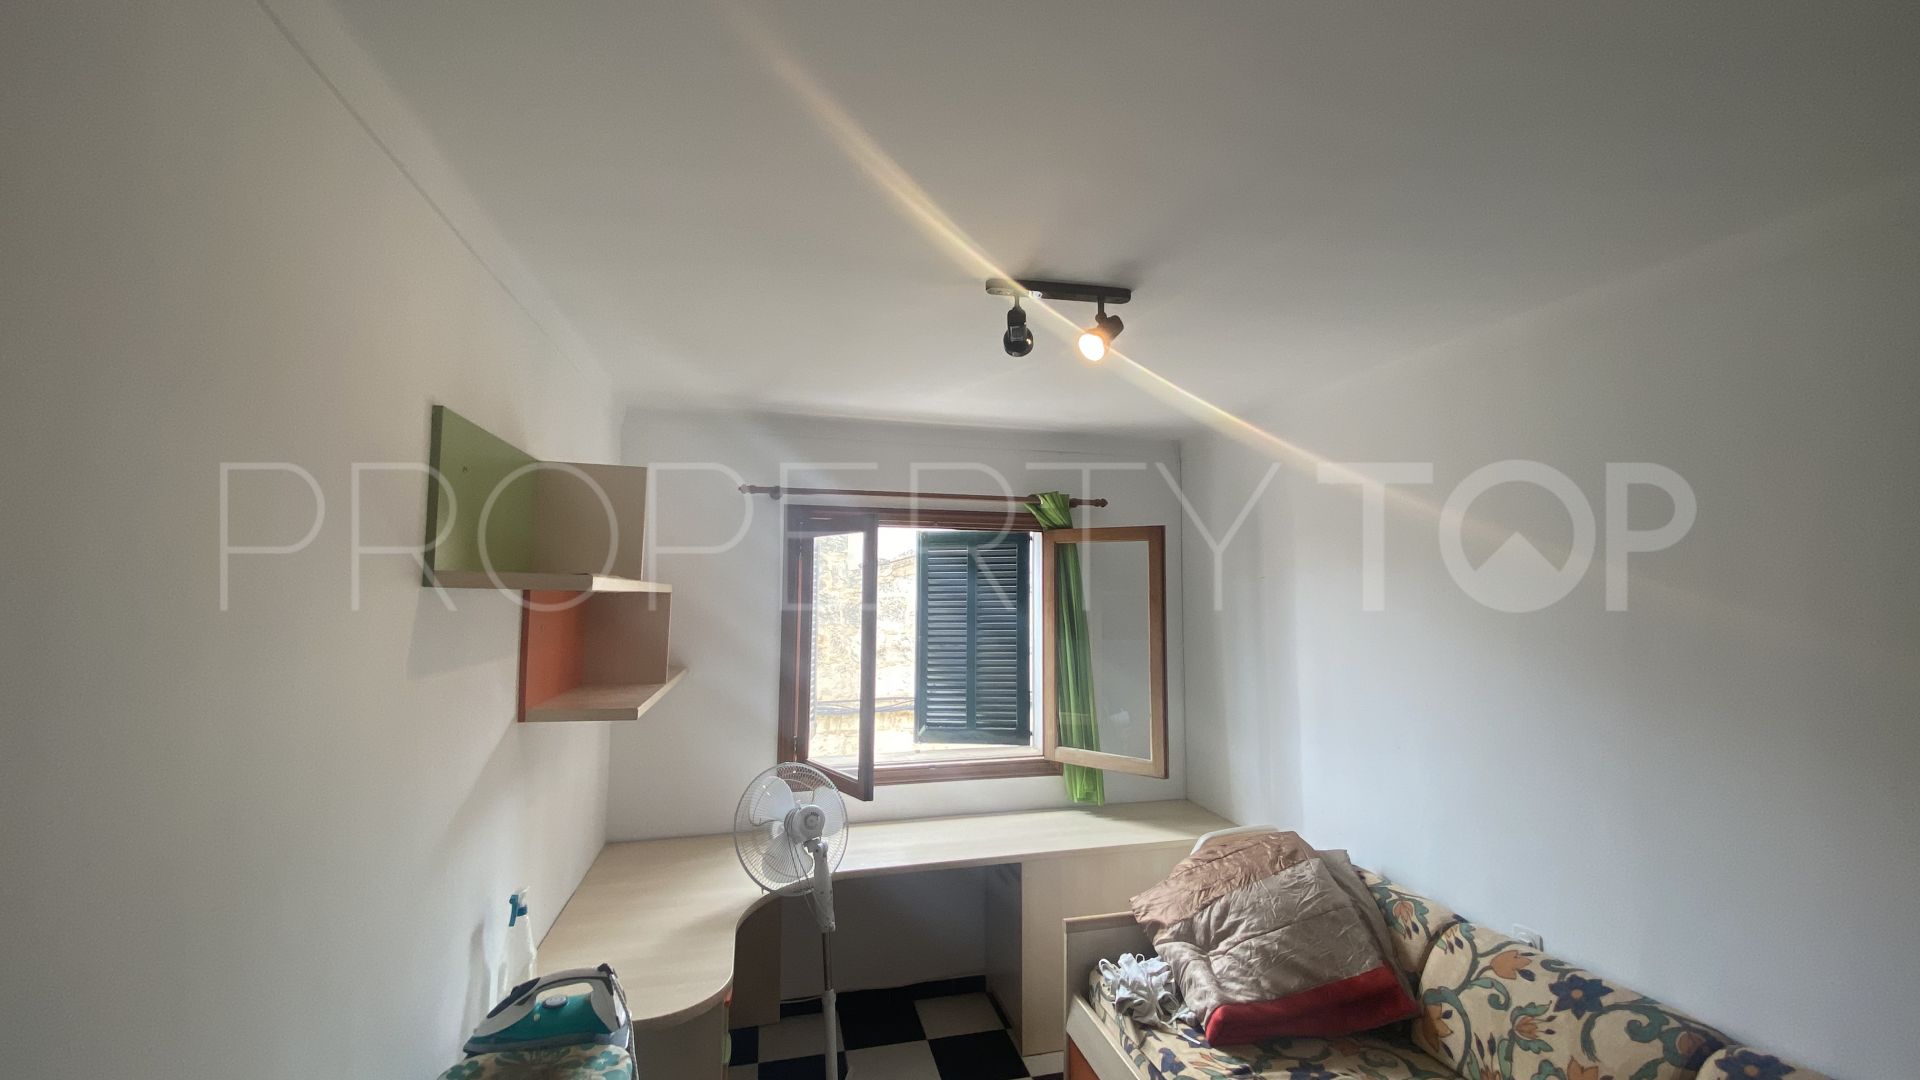 Apartment with 3 bedrooms for sale in Muro